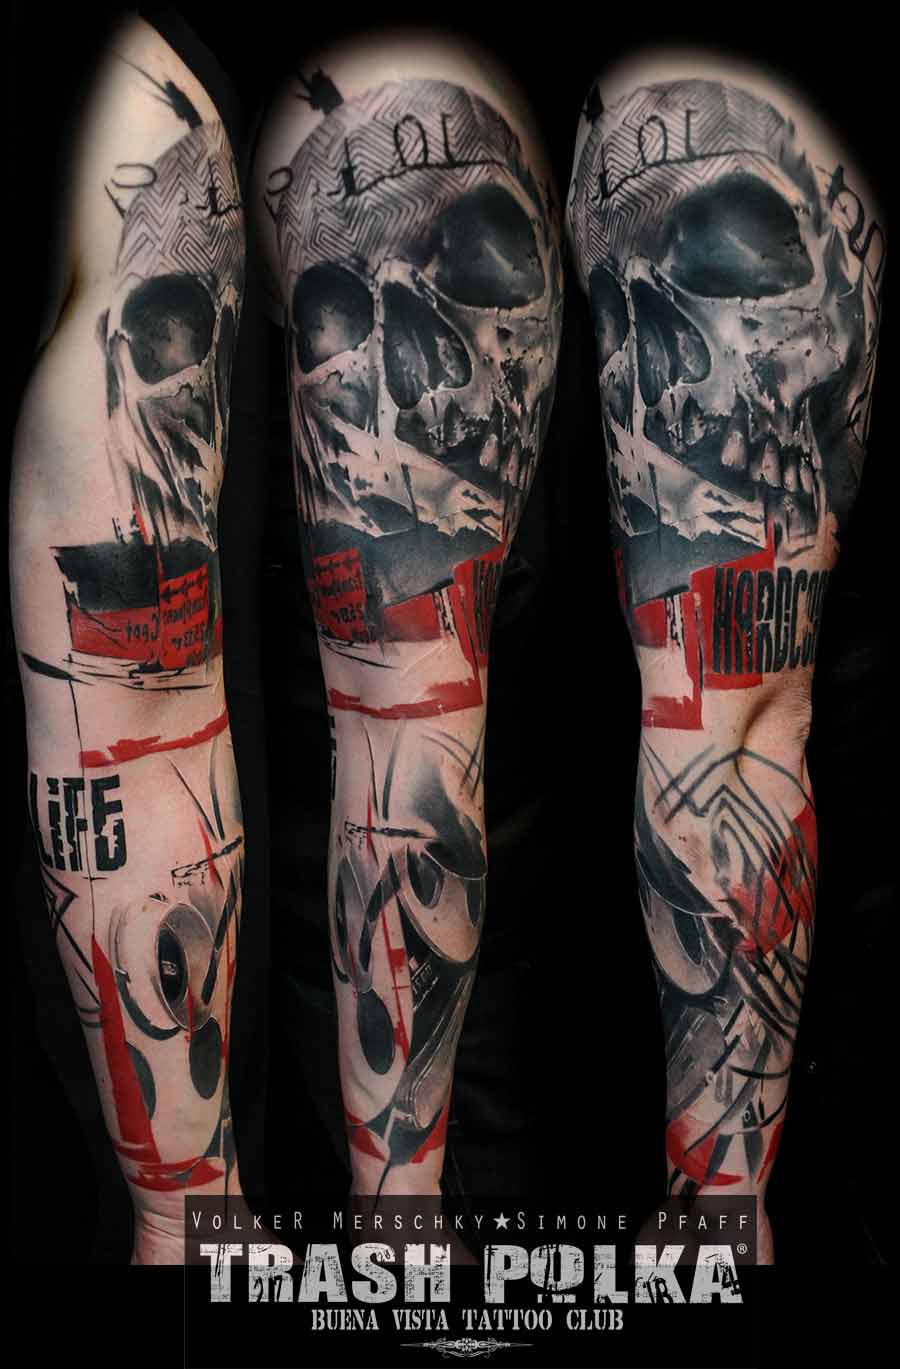 A trash polka arm tattoo shows a tape with a skull in red and black